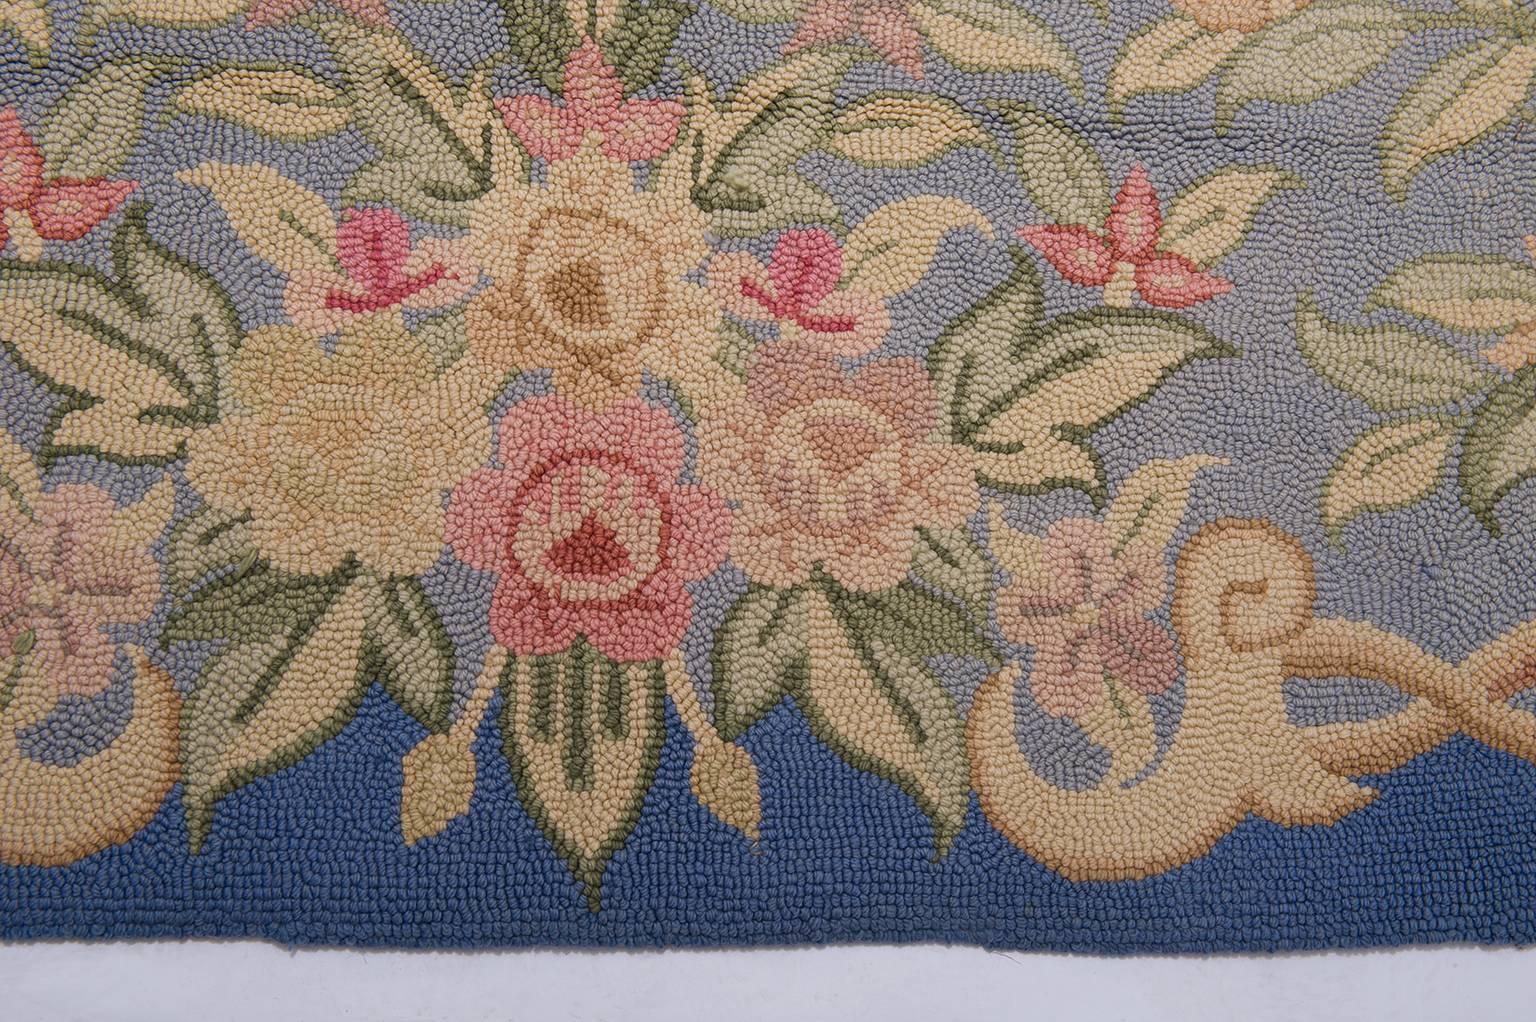   Hooked Carpet in Aubusson Style- FINAL CLEARANCE SALE In Excellent Condition In Alessandria, Piemonte